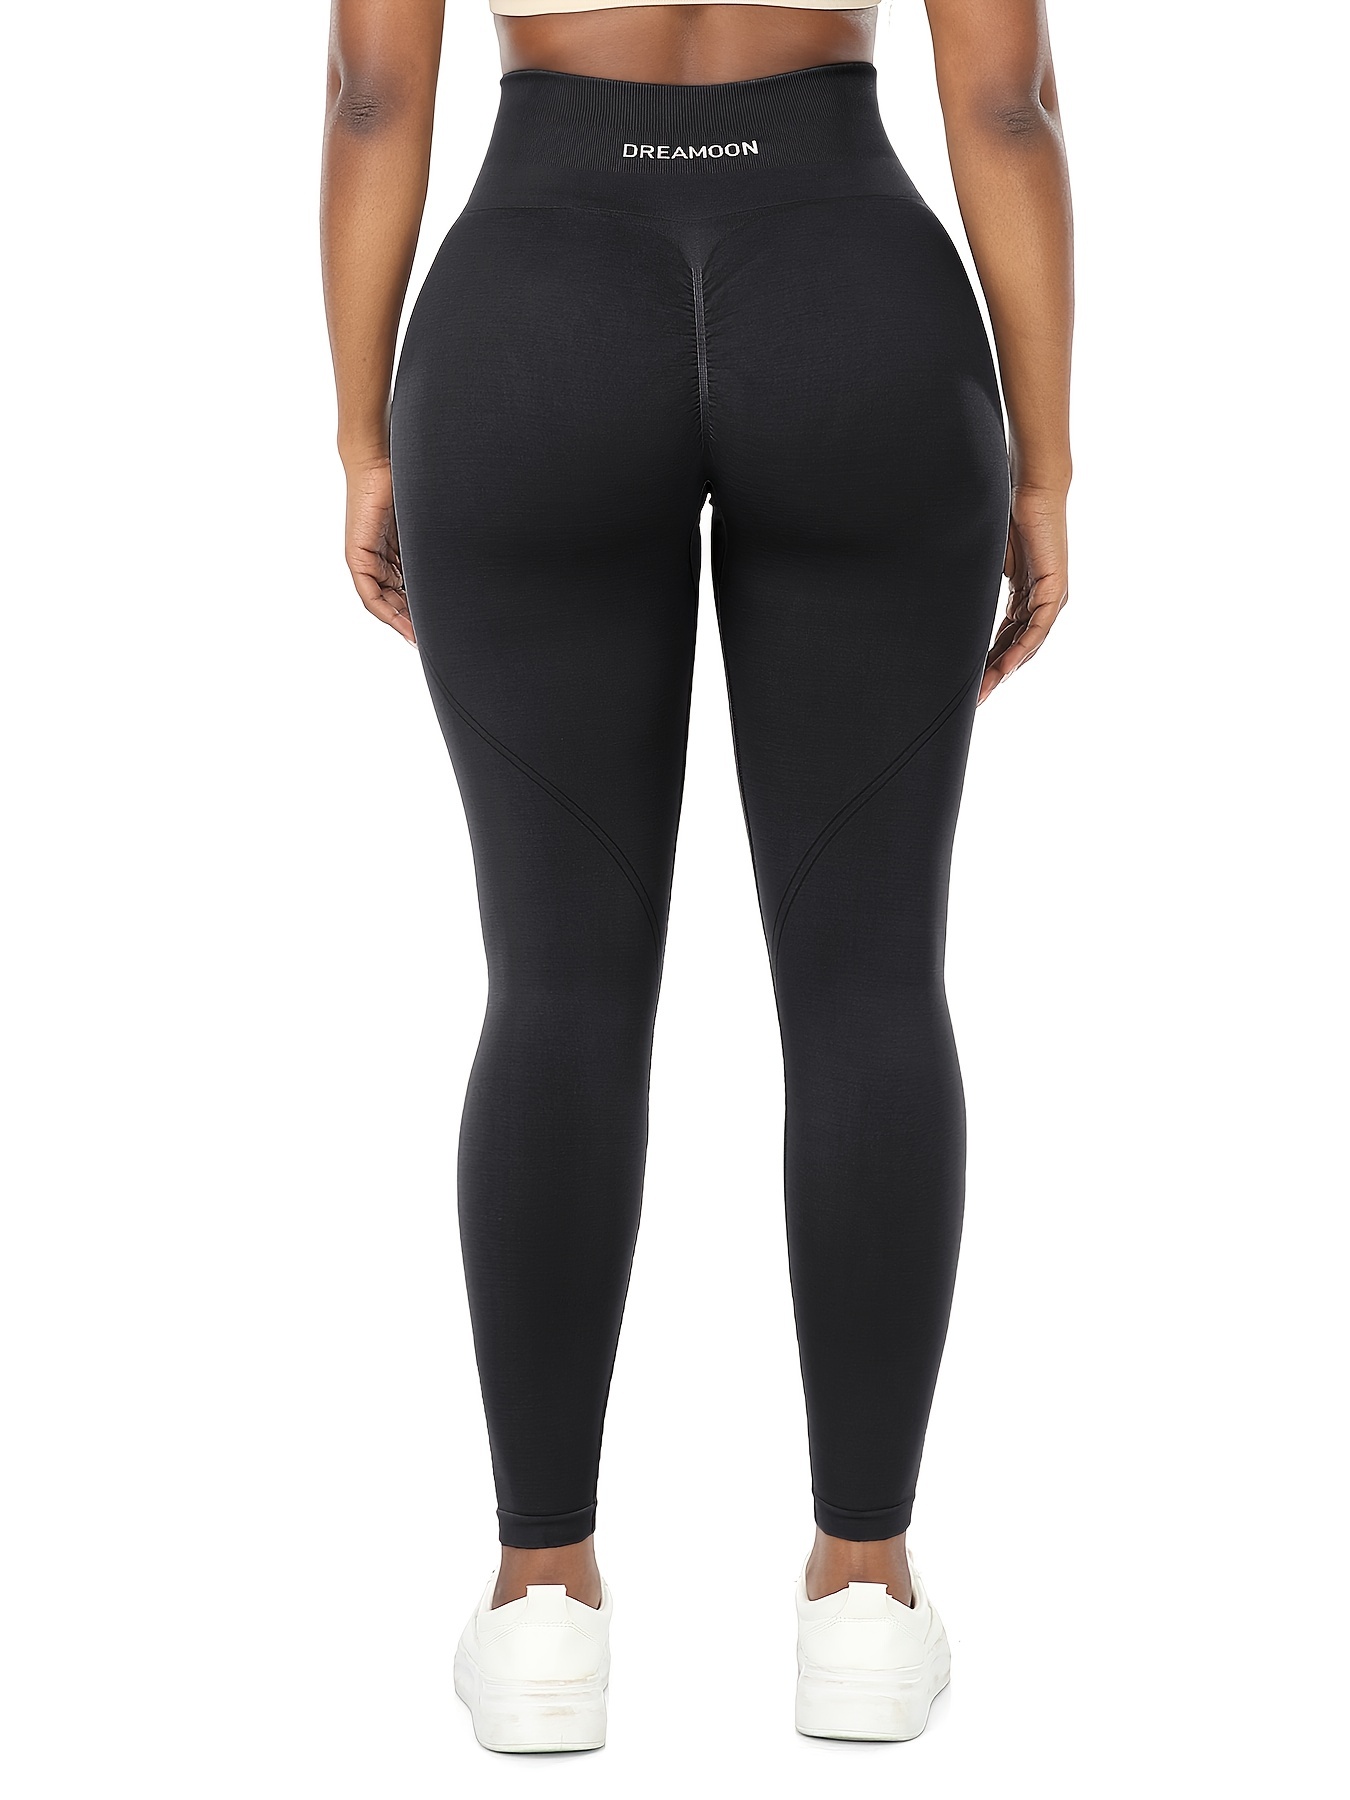 ROOOKU Uplift Squat Proof Workout Leggings for Women Anti-Ripped Scrunch  Butt Lifting Gym Booty Seamless Yoga Pants (Black,S) at  Women's  Clothing store